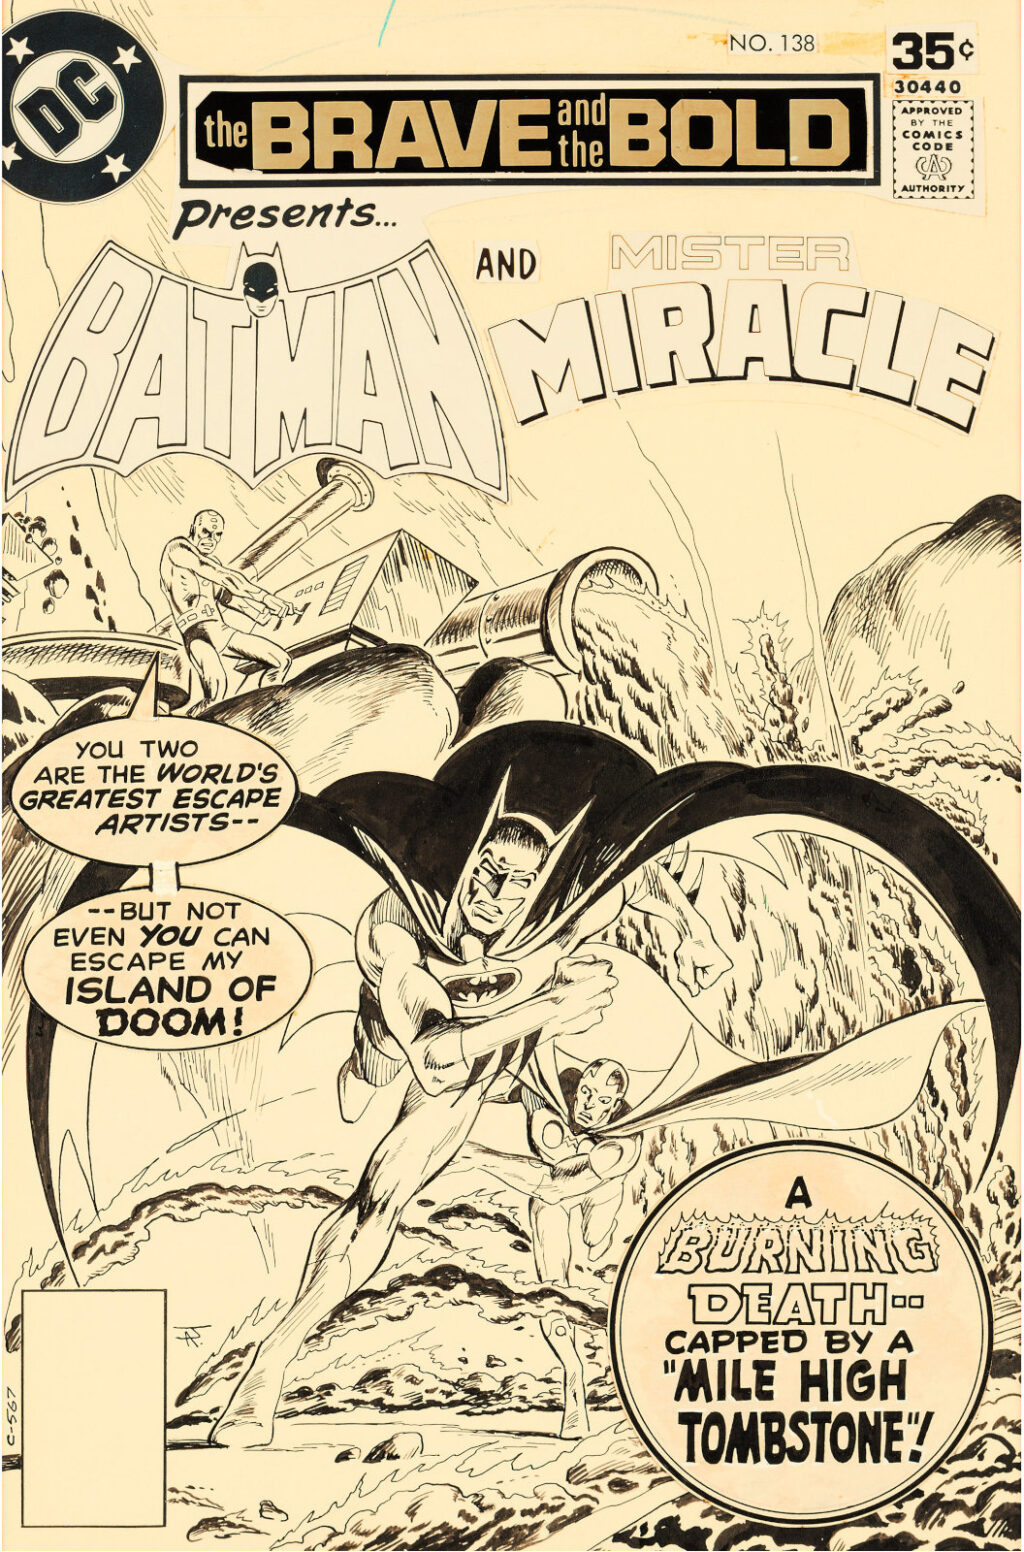 The Brave and the Bold issue 138 cover by Jim Aparo